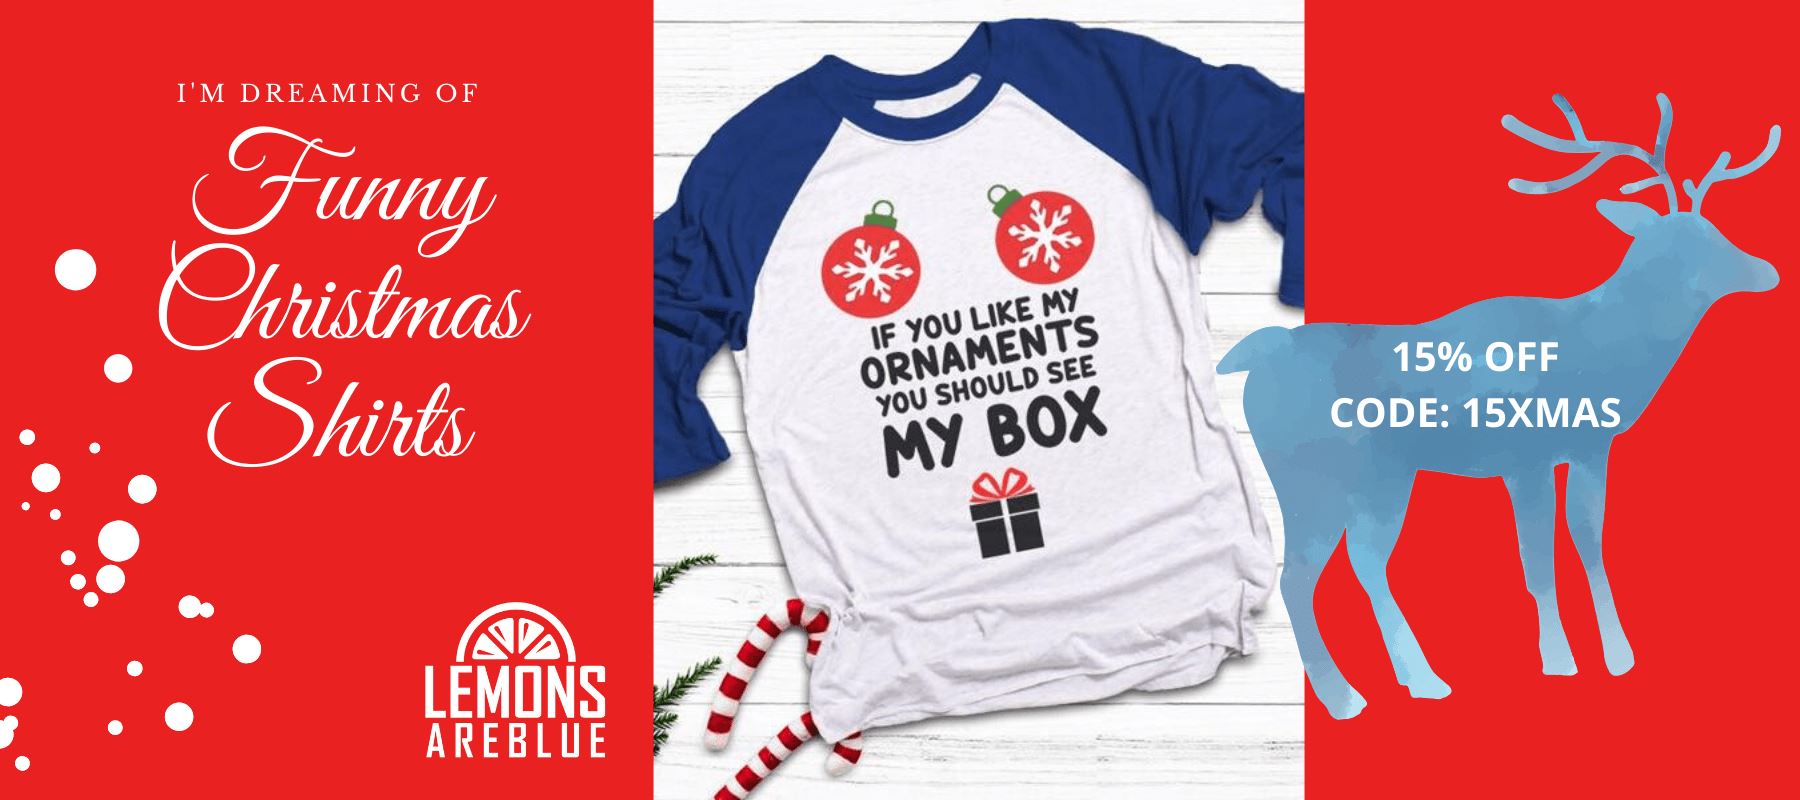 Why Funny Christmas Shirts Are A Smart Buy